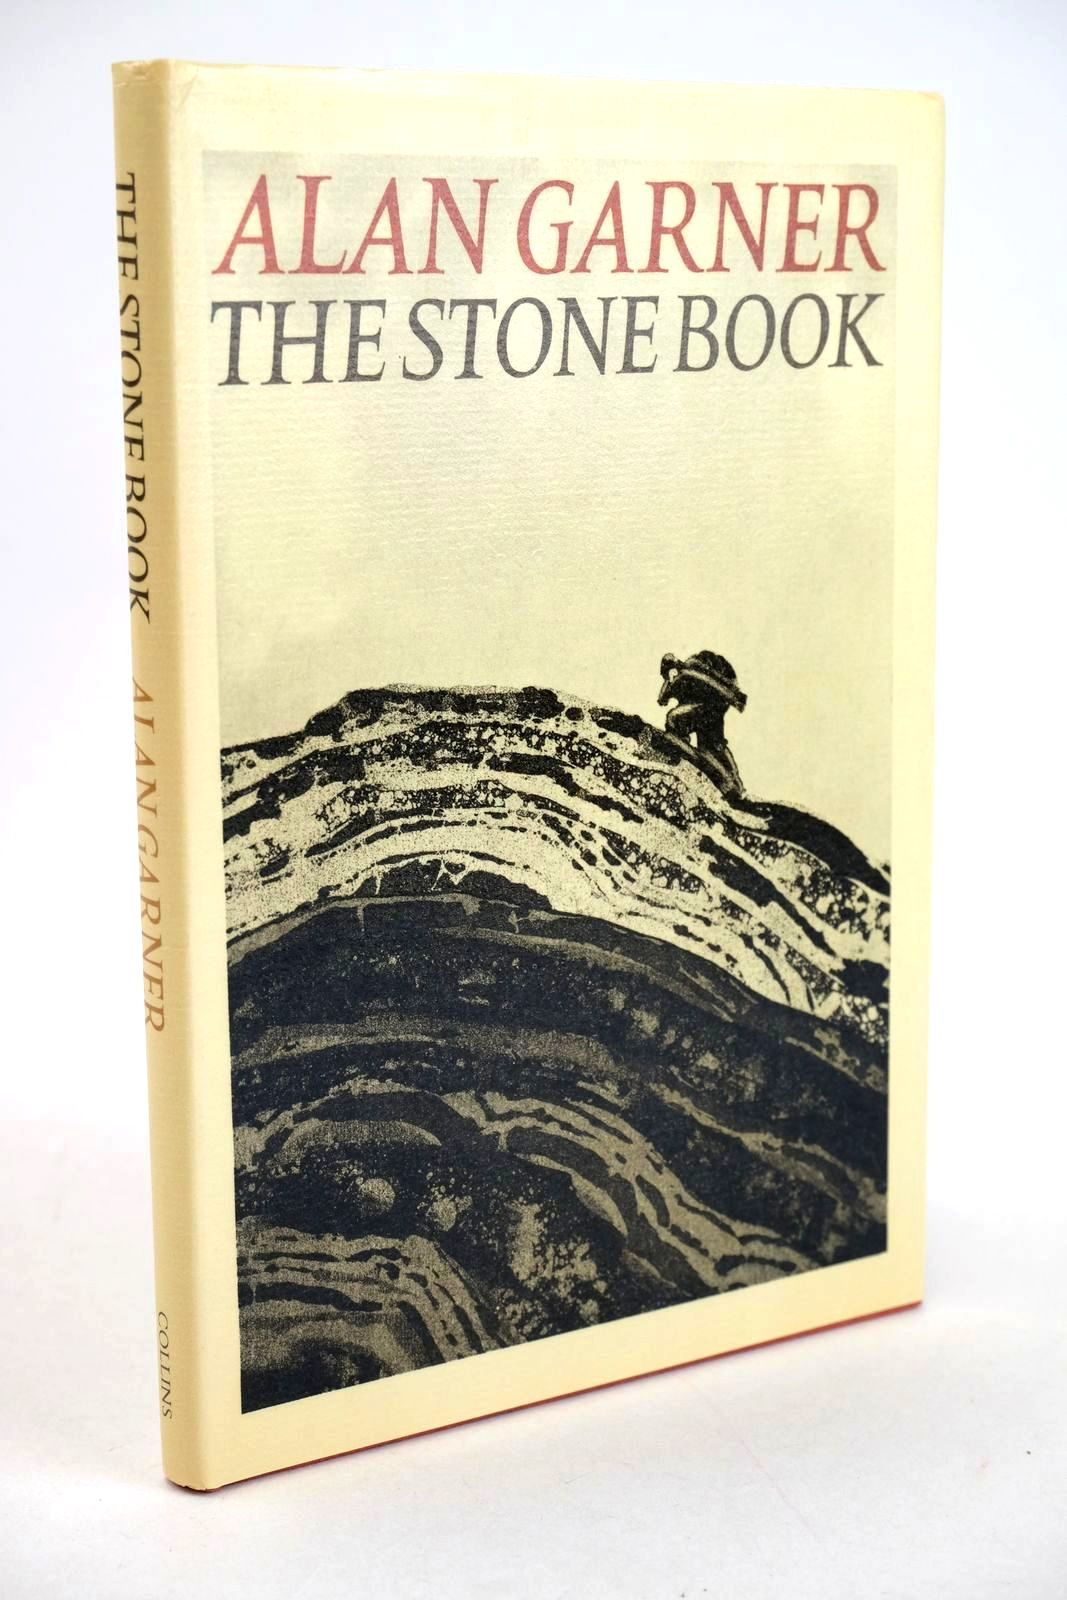 Photo of THE STONE BOOK written by Garner, Alan illustrated by Foreman, Michael published by Collins (STOCK CODE: 1327997)  for sale by Stella & Rose's Books